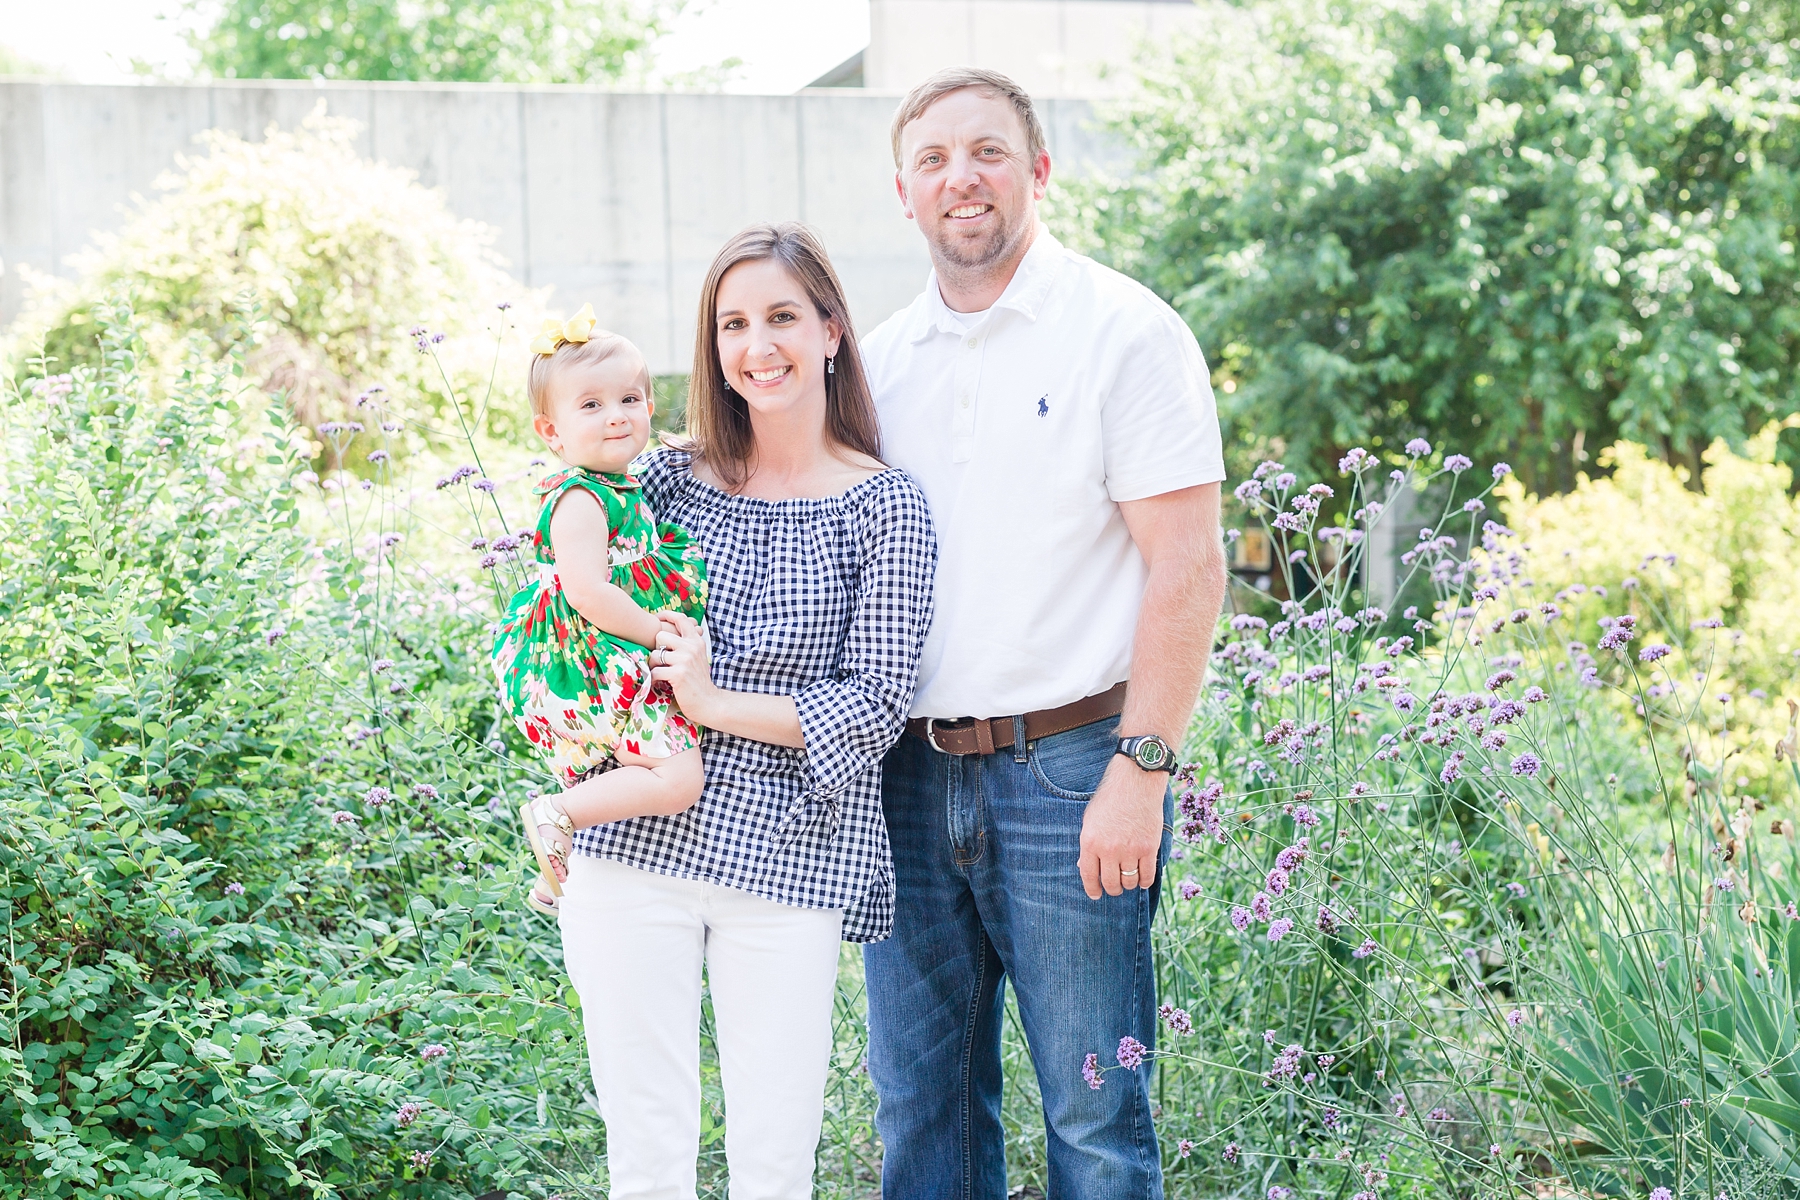 Family photographer in Raleigh, NC | Traci Huffman Photography | Farrell Family Sneak Previews_0008.jpg